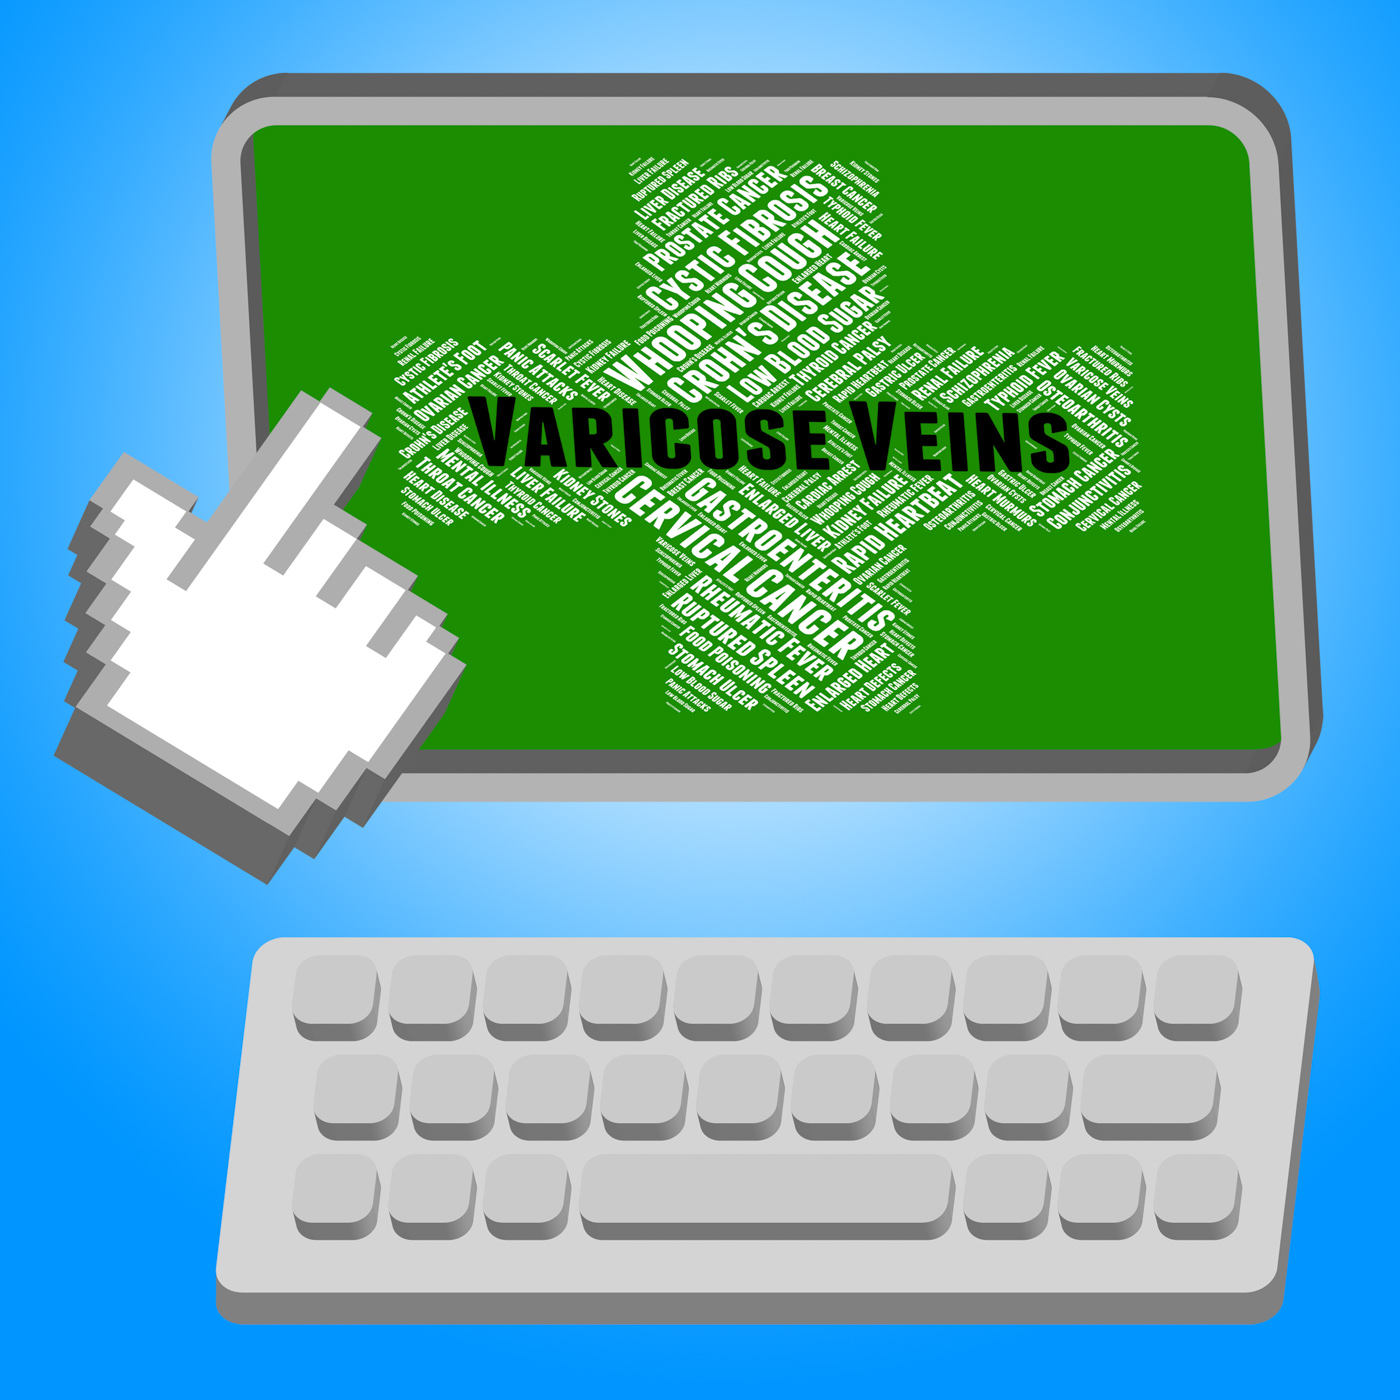 Varicose veins represents blood vessels and afflictions photo